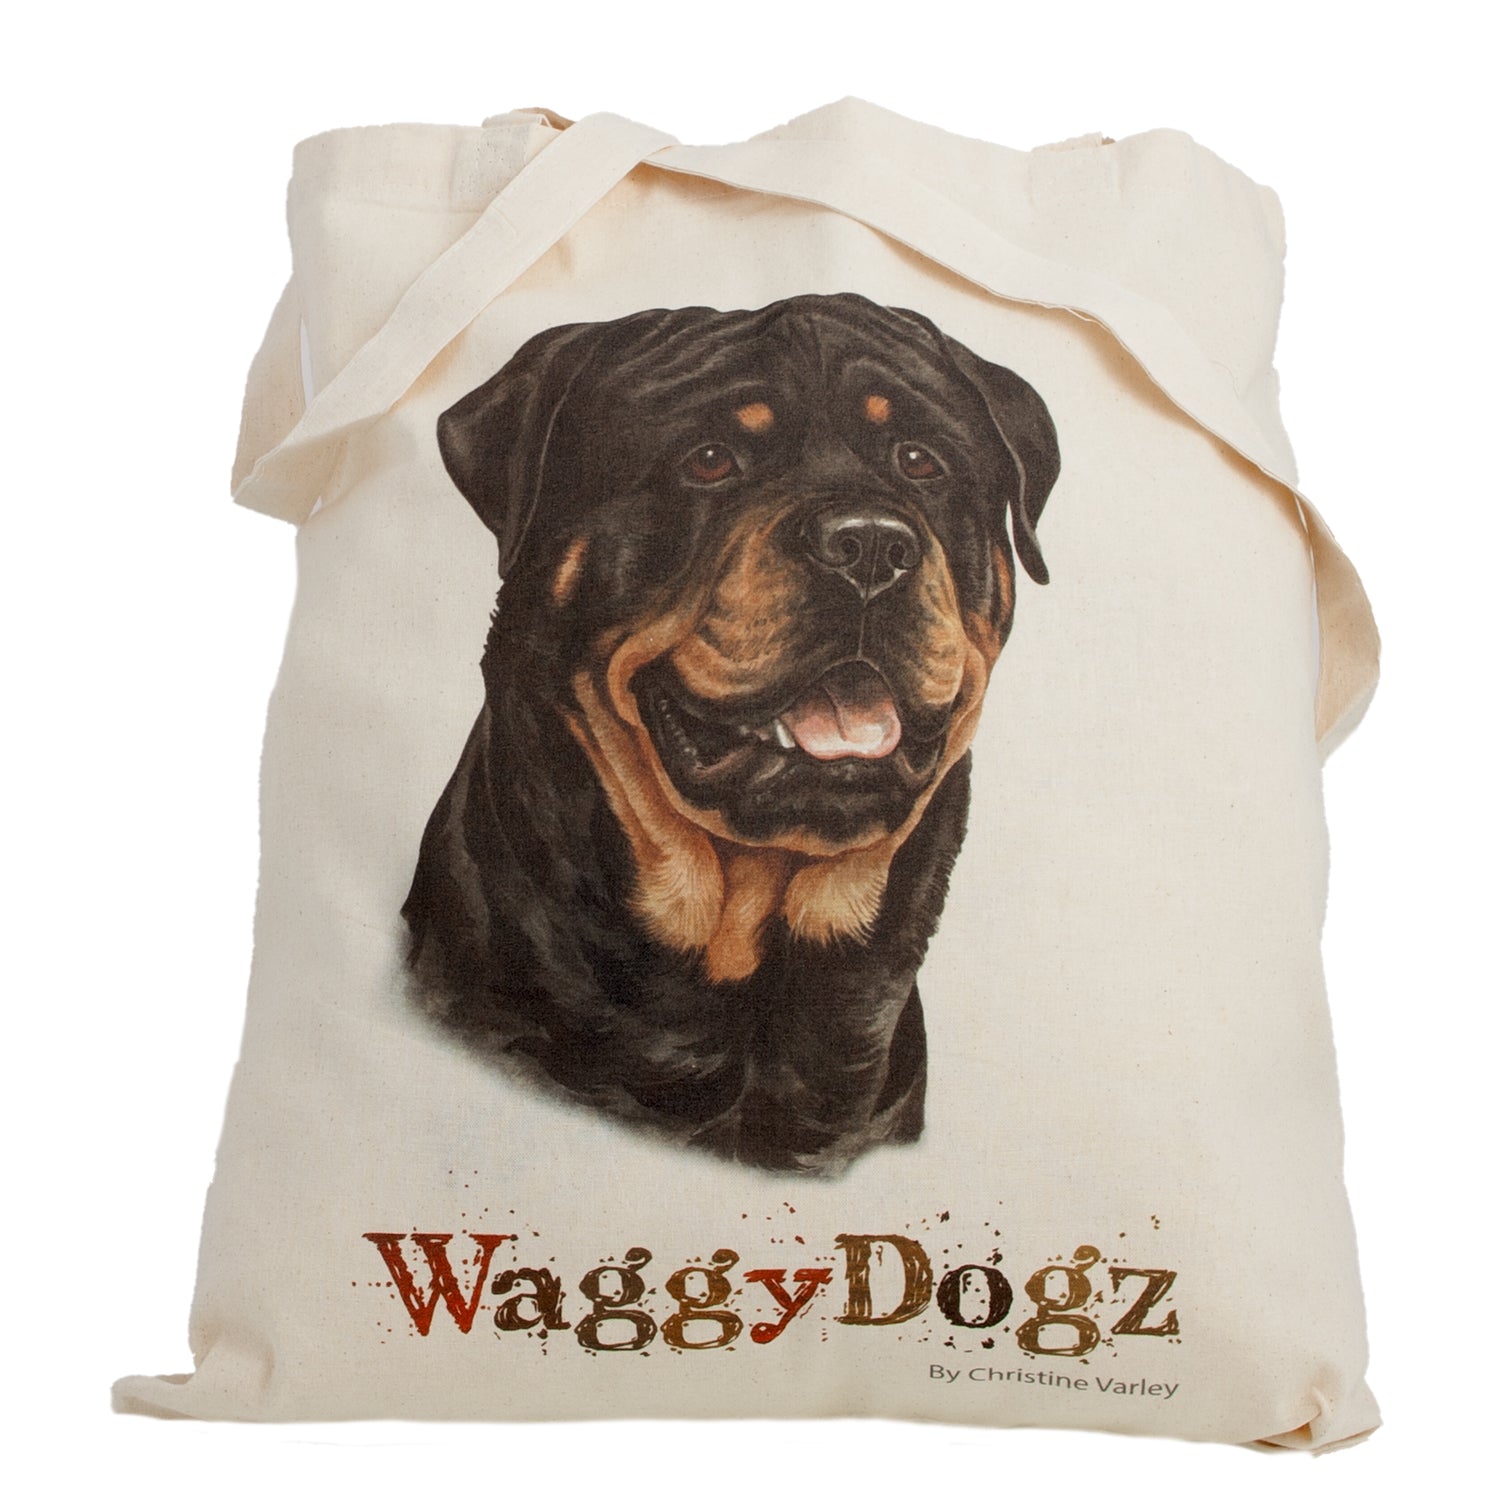 Dog Lover Gifts available at Dog Krazy Gifts. Rottweiler Tote Bag, part of our Christine Varley collection – available at www.dogkrazygifts.co.uk